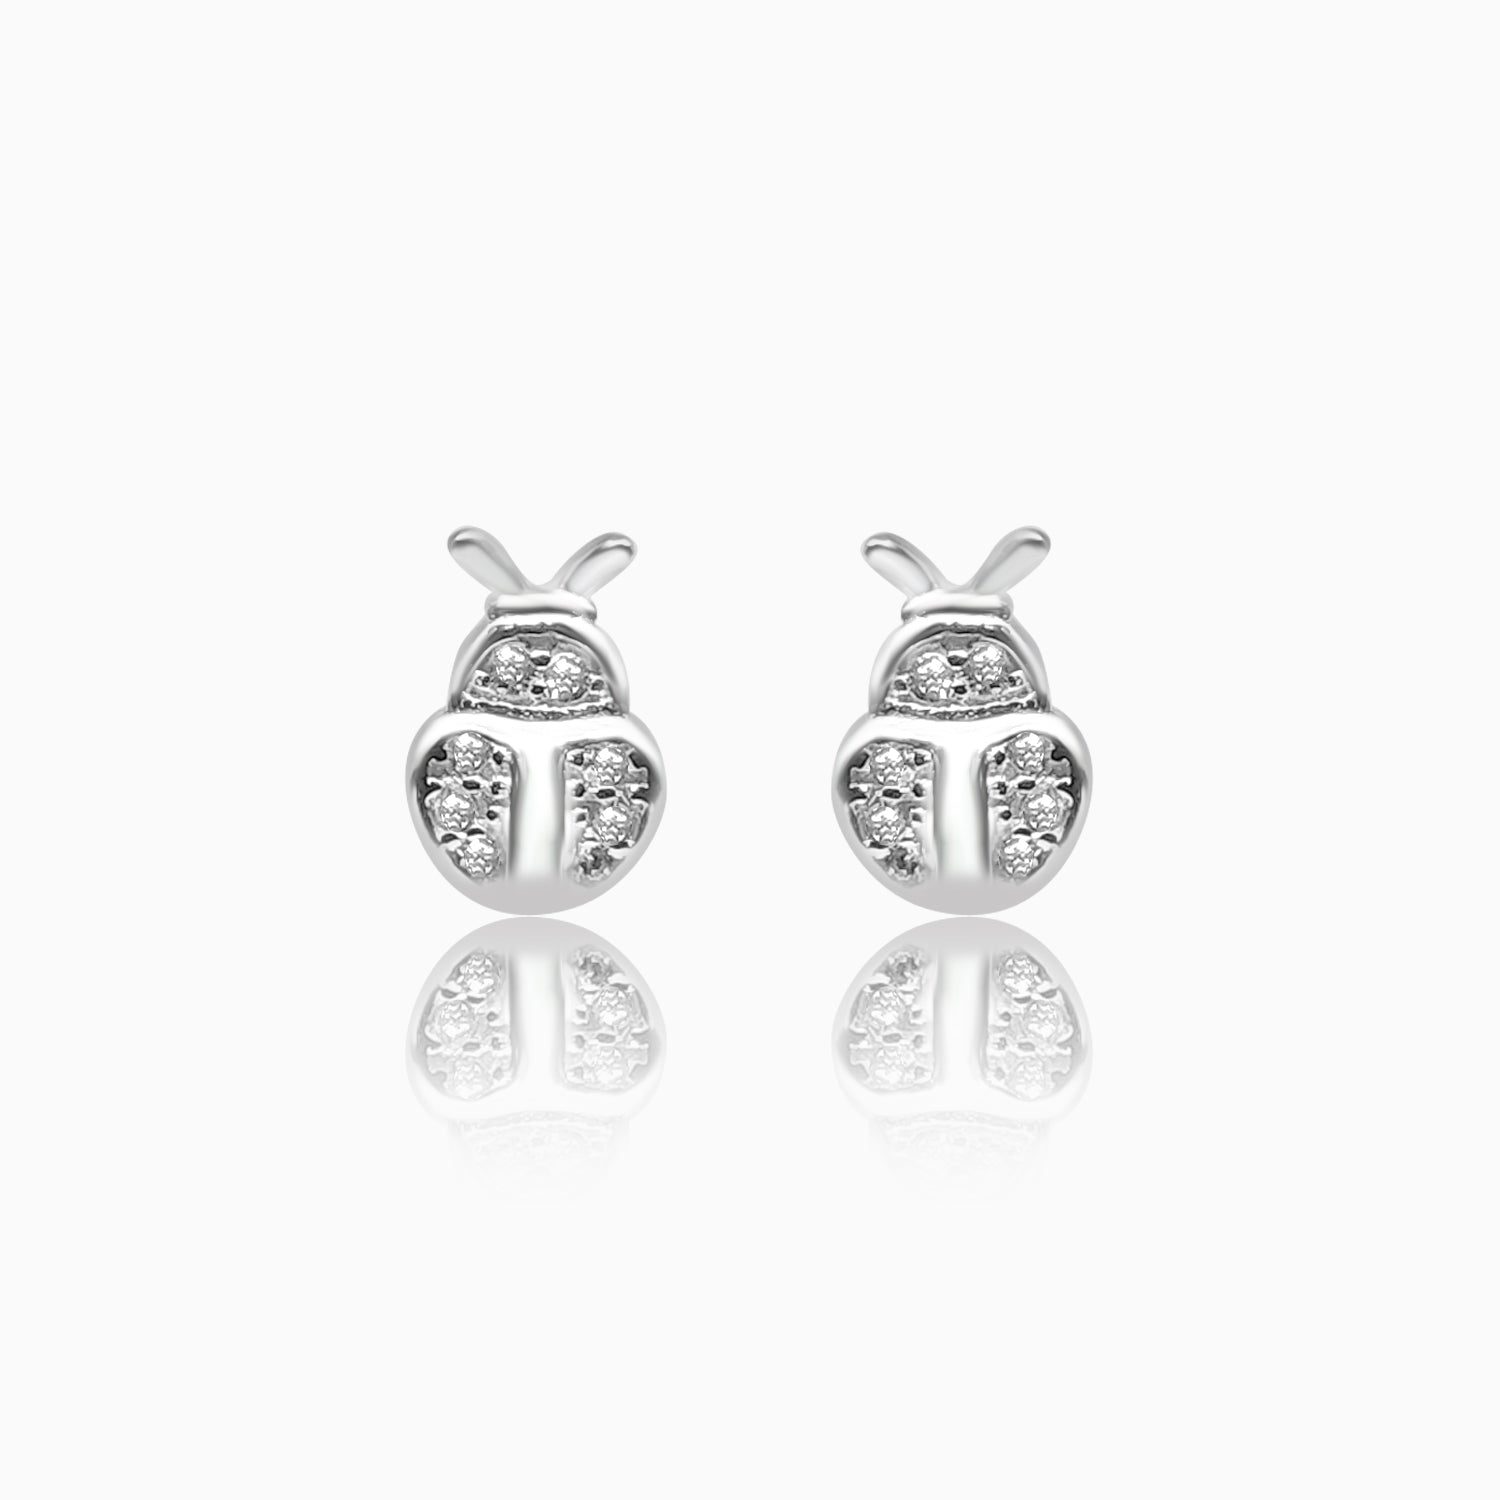 Silver Sparkling Lady Bug Earrings